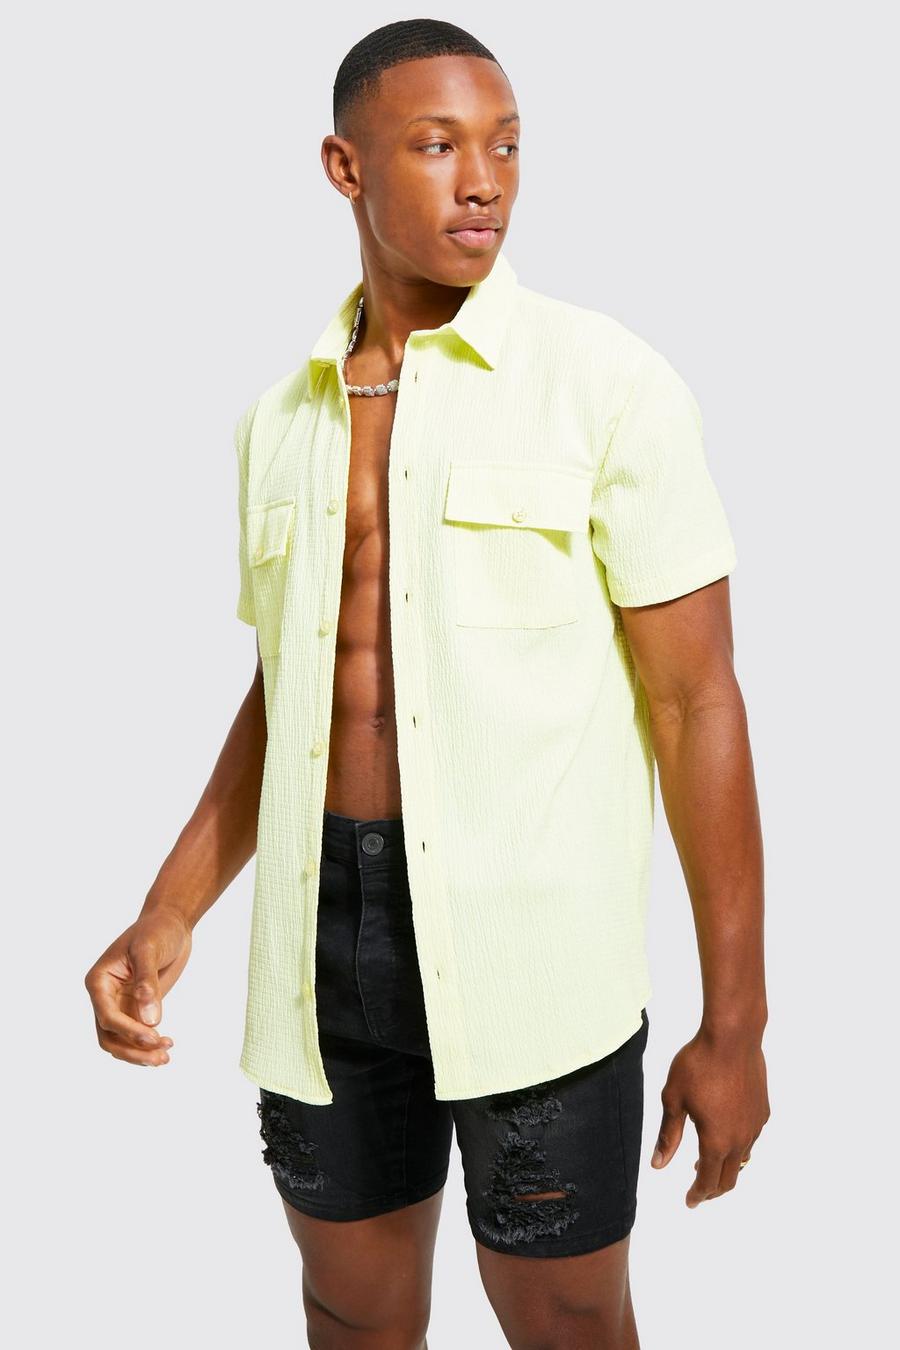 Chemise style utilitaire à manches courtes, Yellow gelb